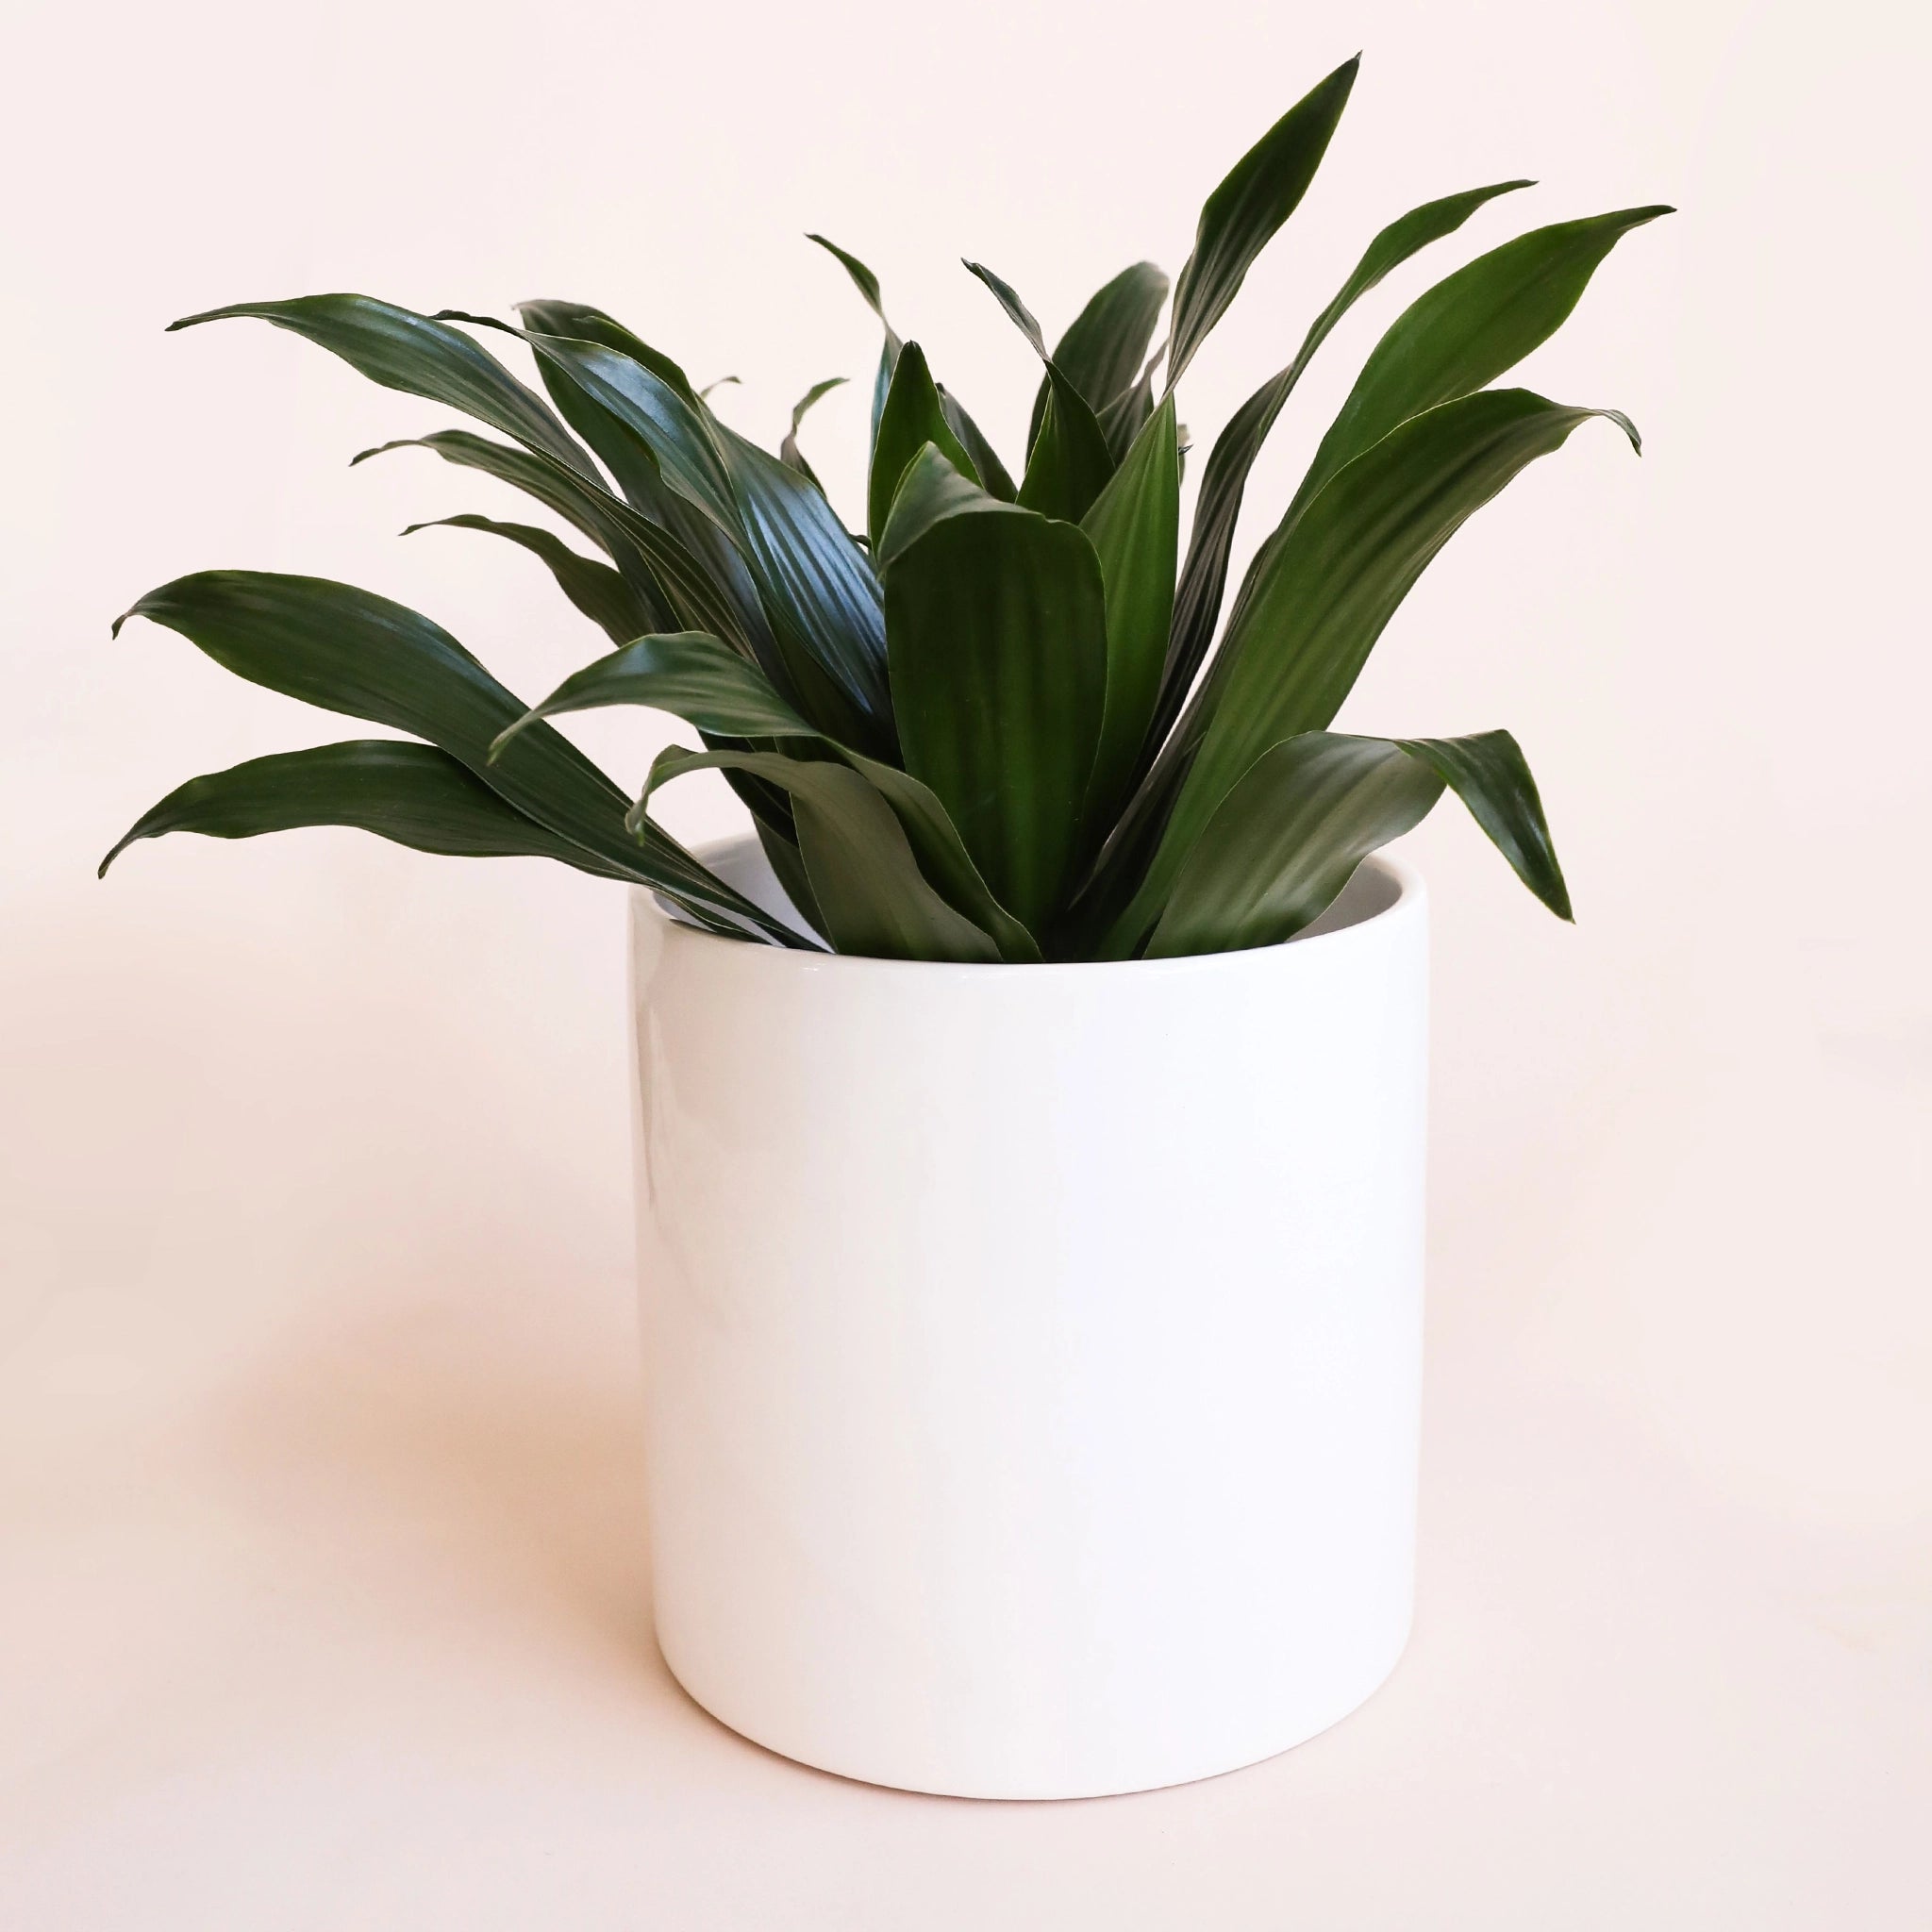 This bright white cylinder pot homes a forest green plant with long, sword-like leaves